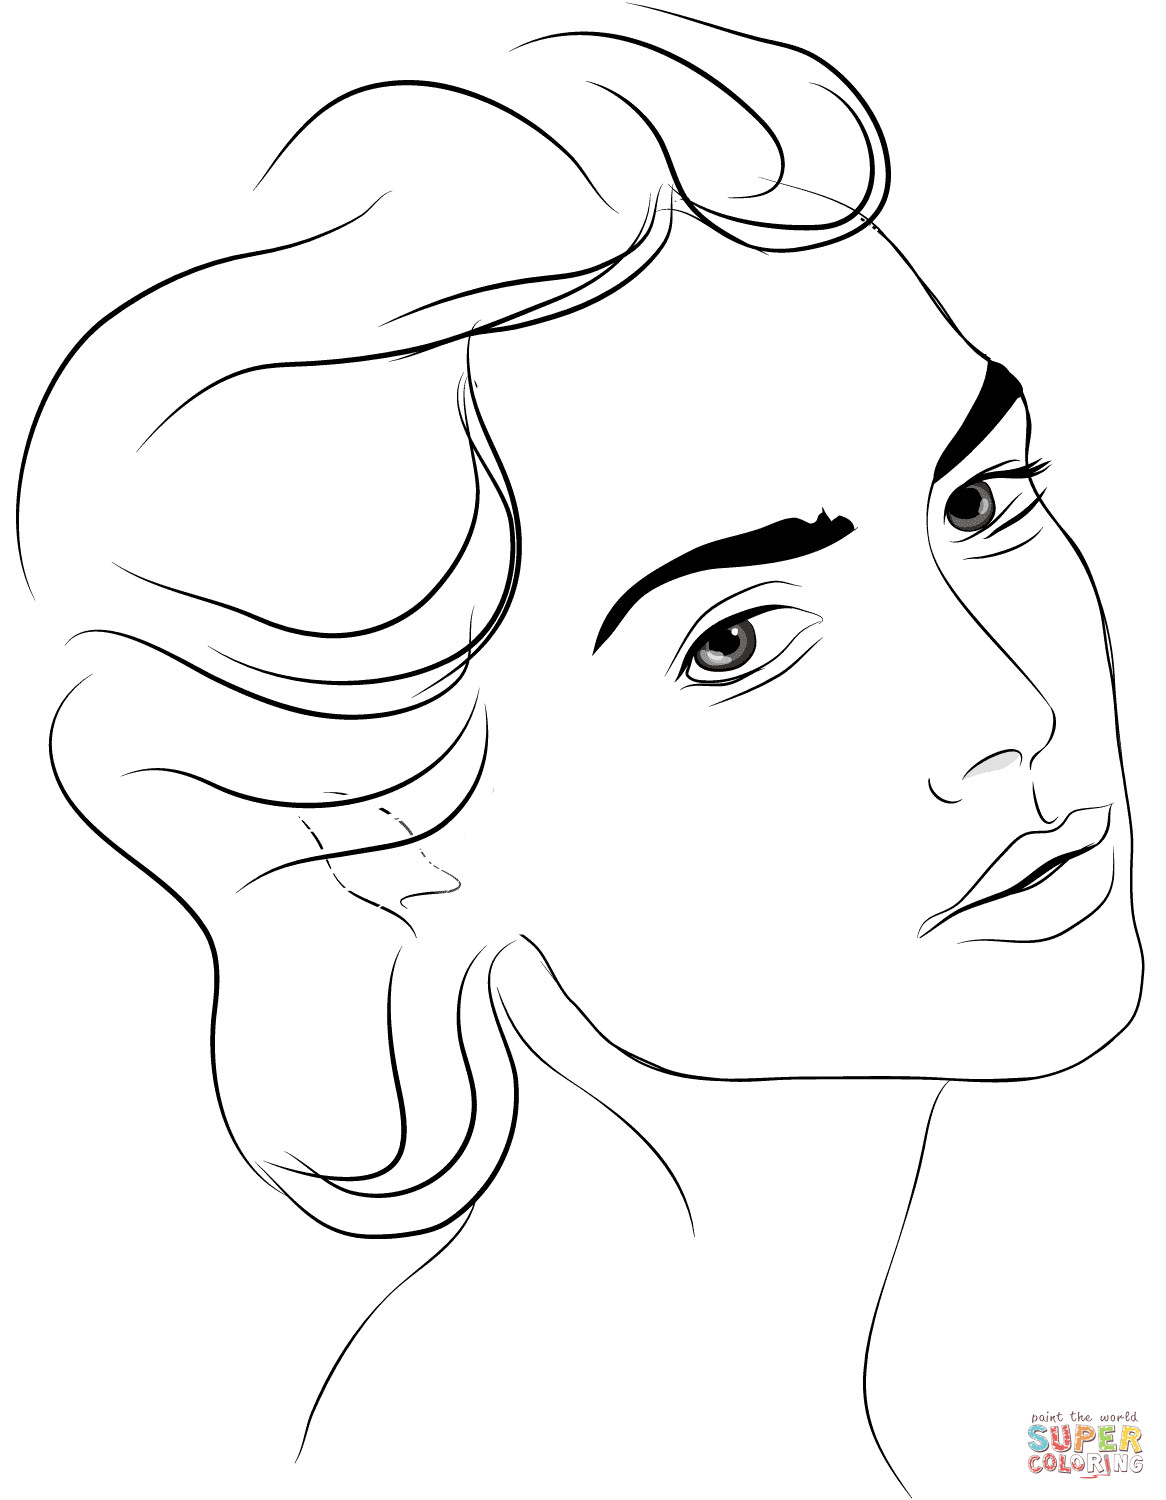 Female Coloring Pages
 Woman s Face coloring page